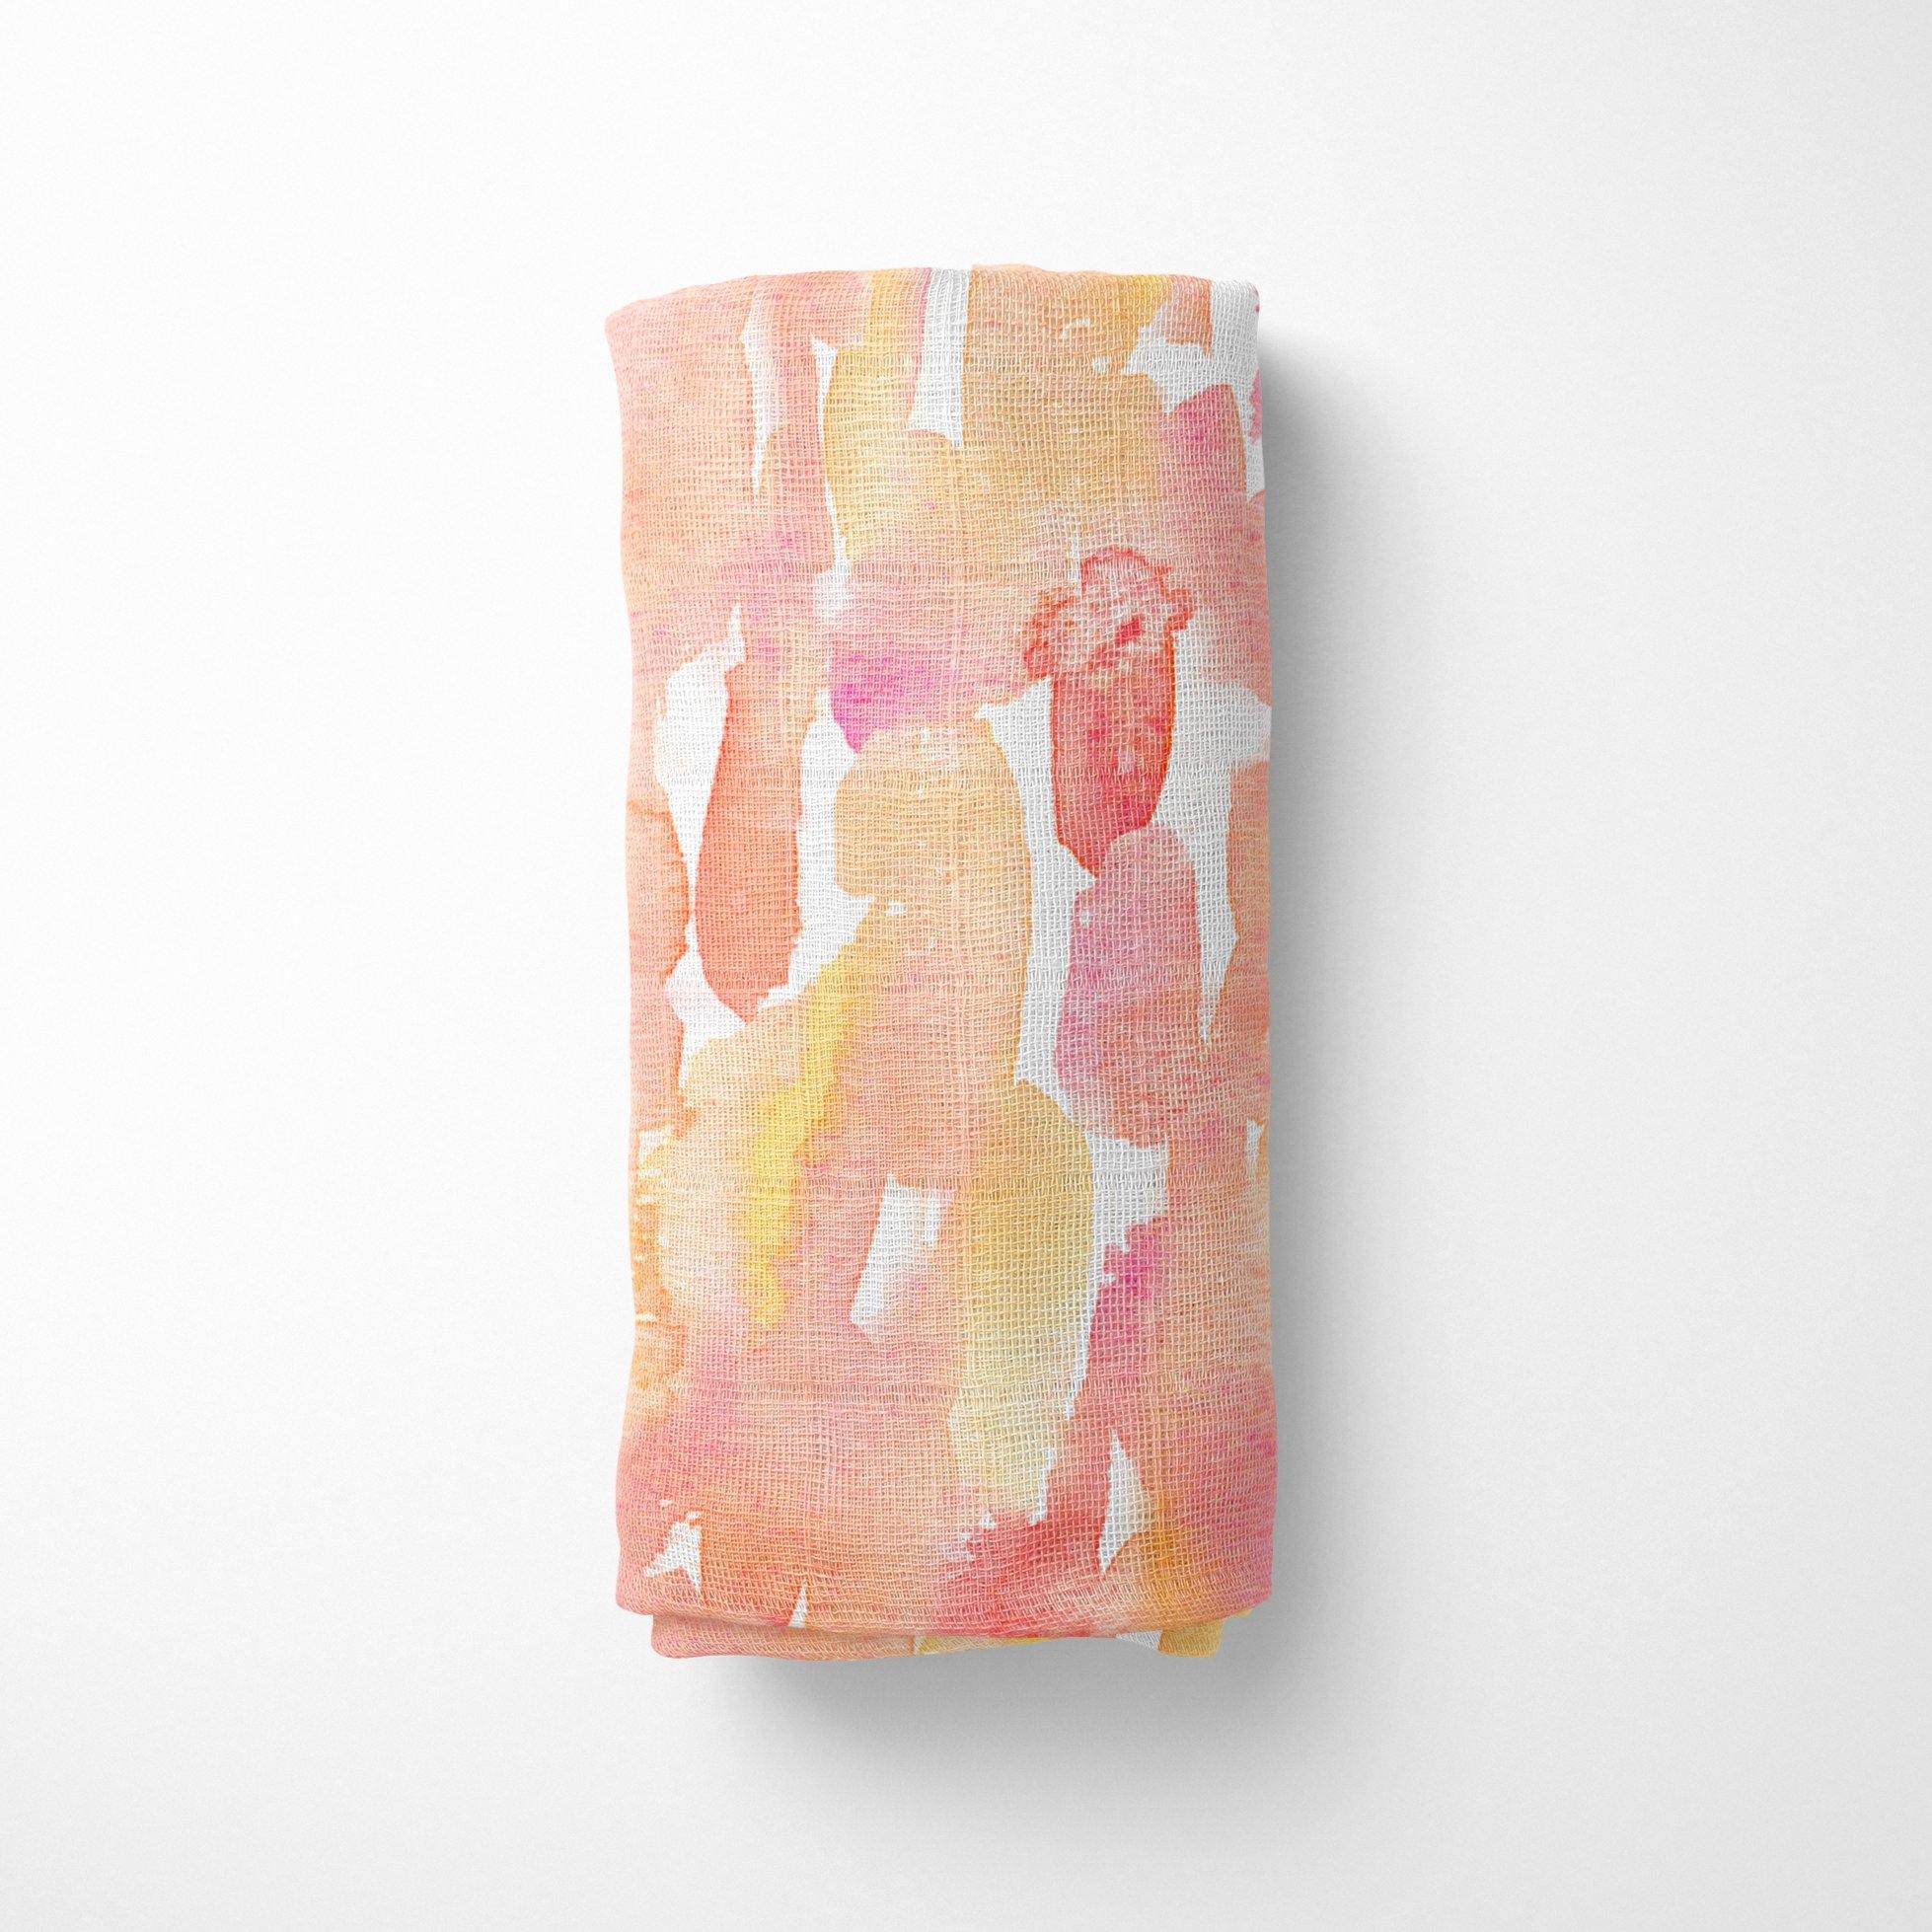 Stretchy Baby Swaddle Blanket in Pink and Orange Pastel Print